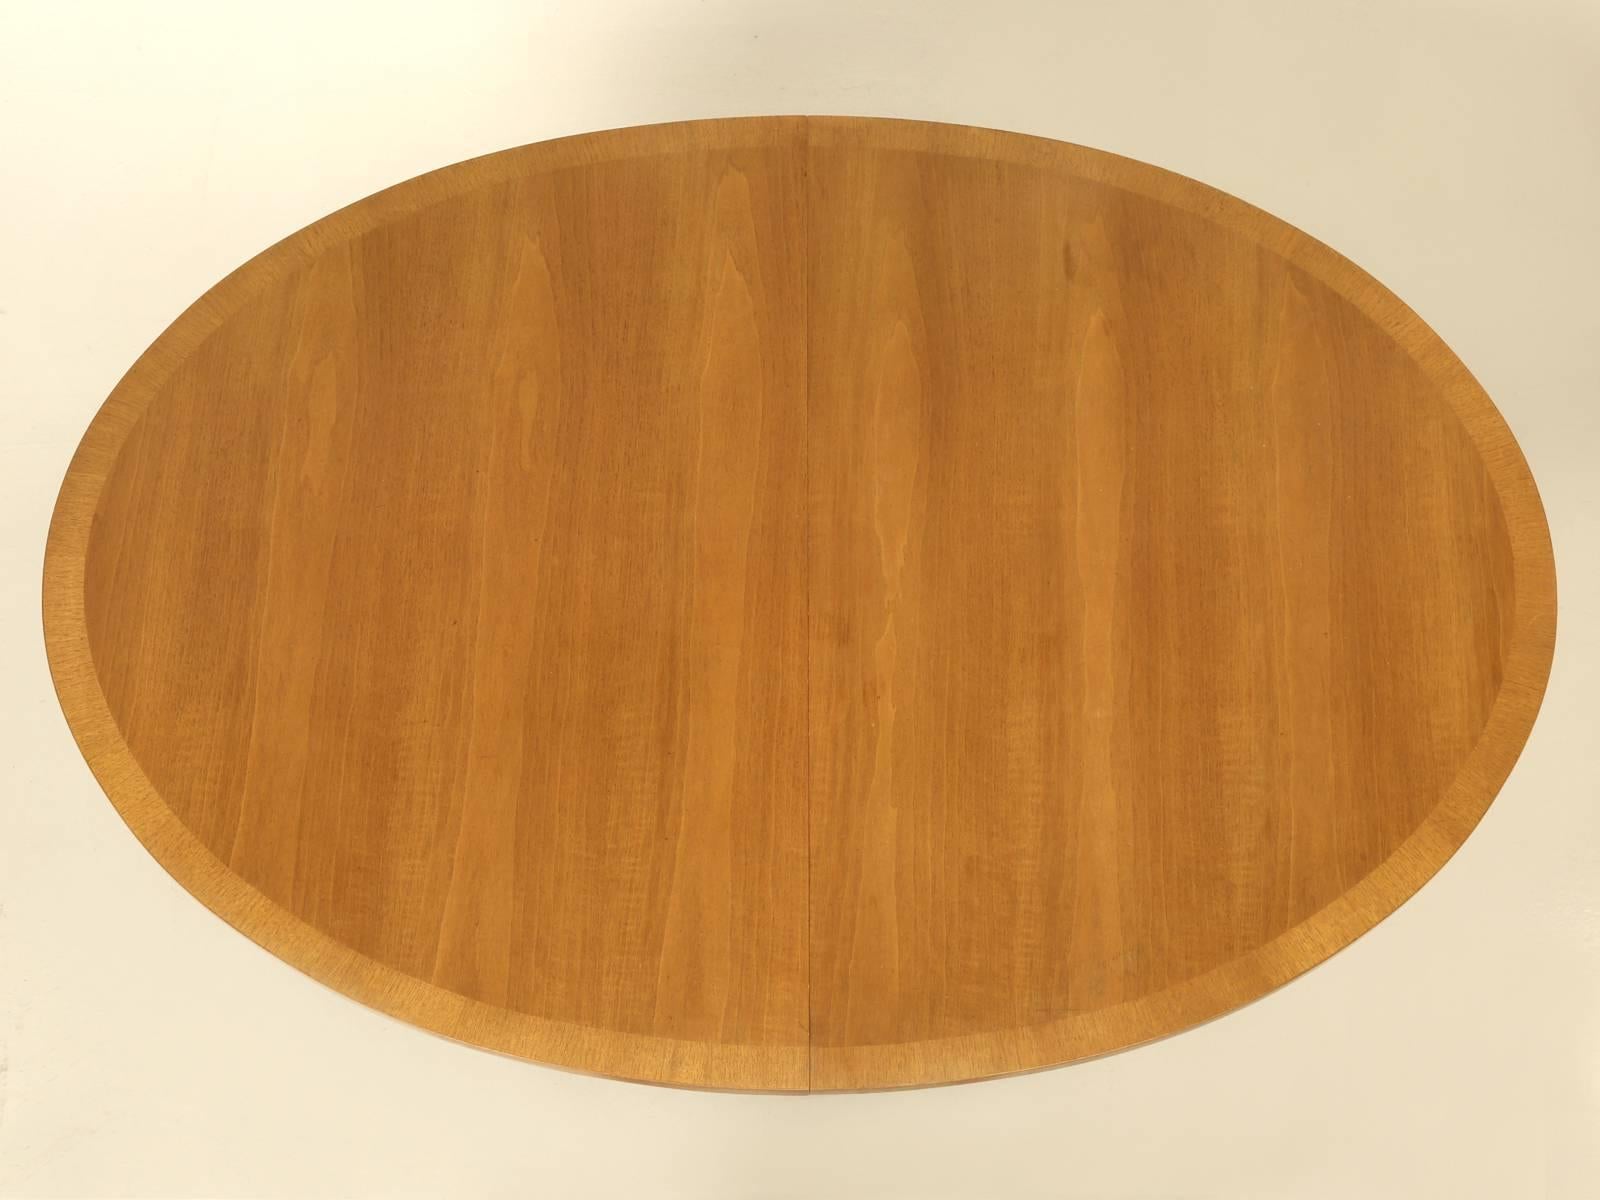 Manufactured by the Sligh Furniture grand rapids chair company in Michigan. This Mid-Century Modern dining table with two matching leaves has a Scandinavia style to it. Nice original condition and had never been repaired or refinished. We have the